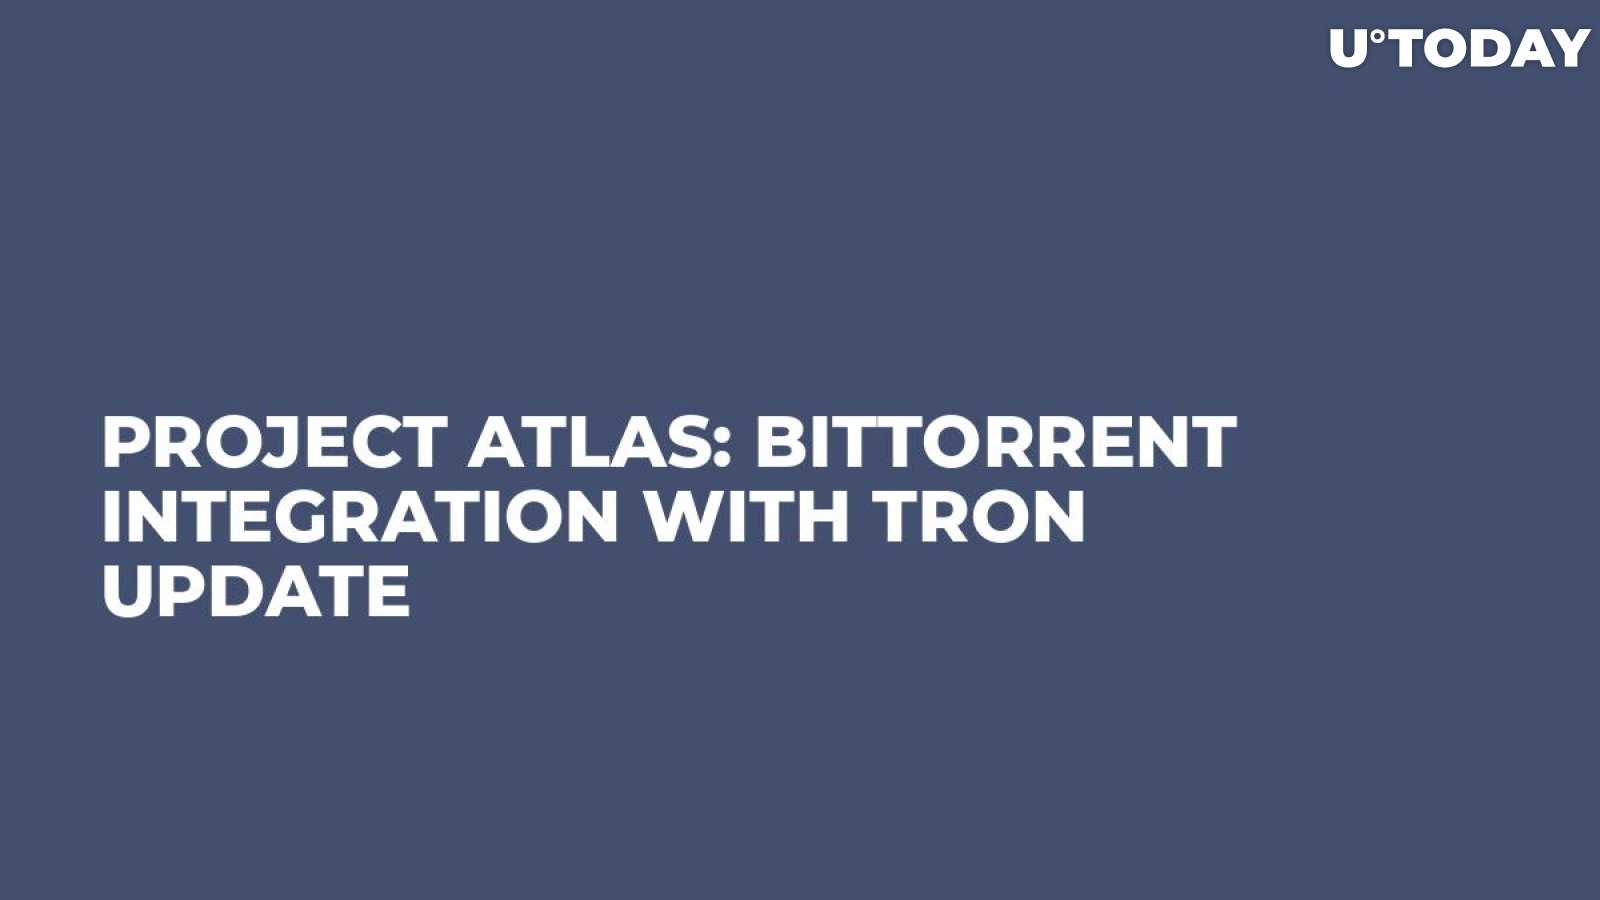 Project Atlas: BitTorrent Integration With TRON Update